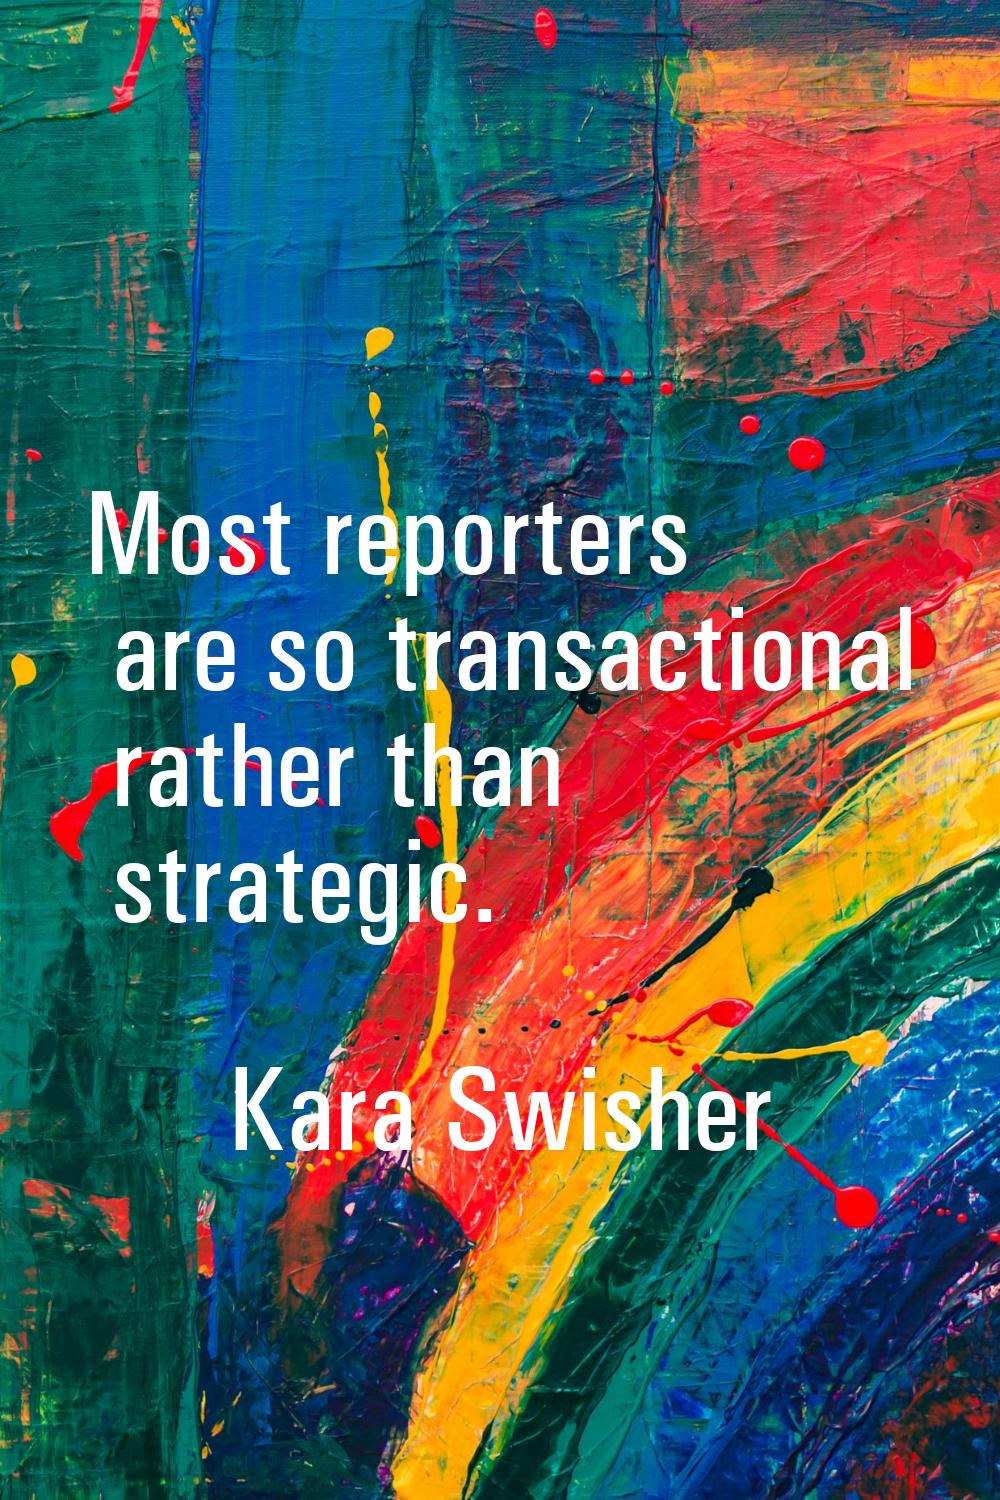 Most reporters are so transactional rather than strategic.